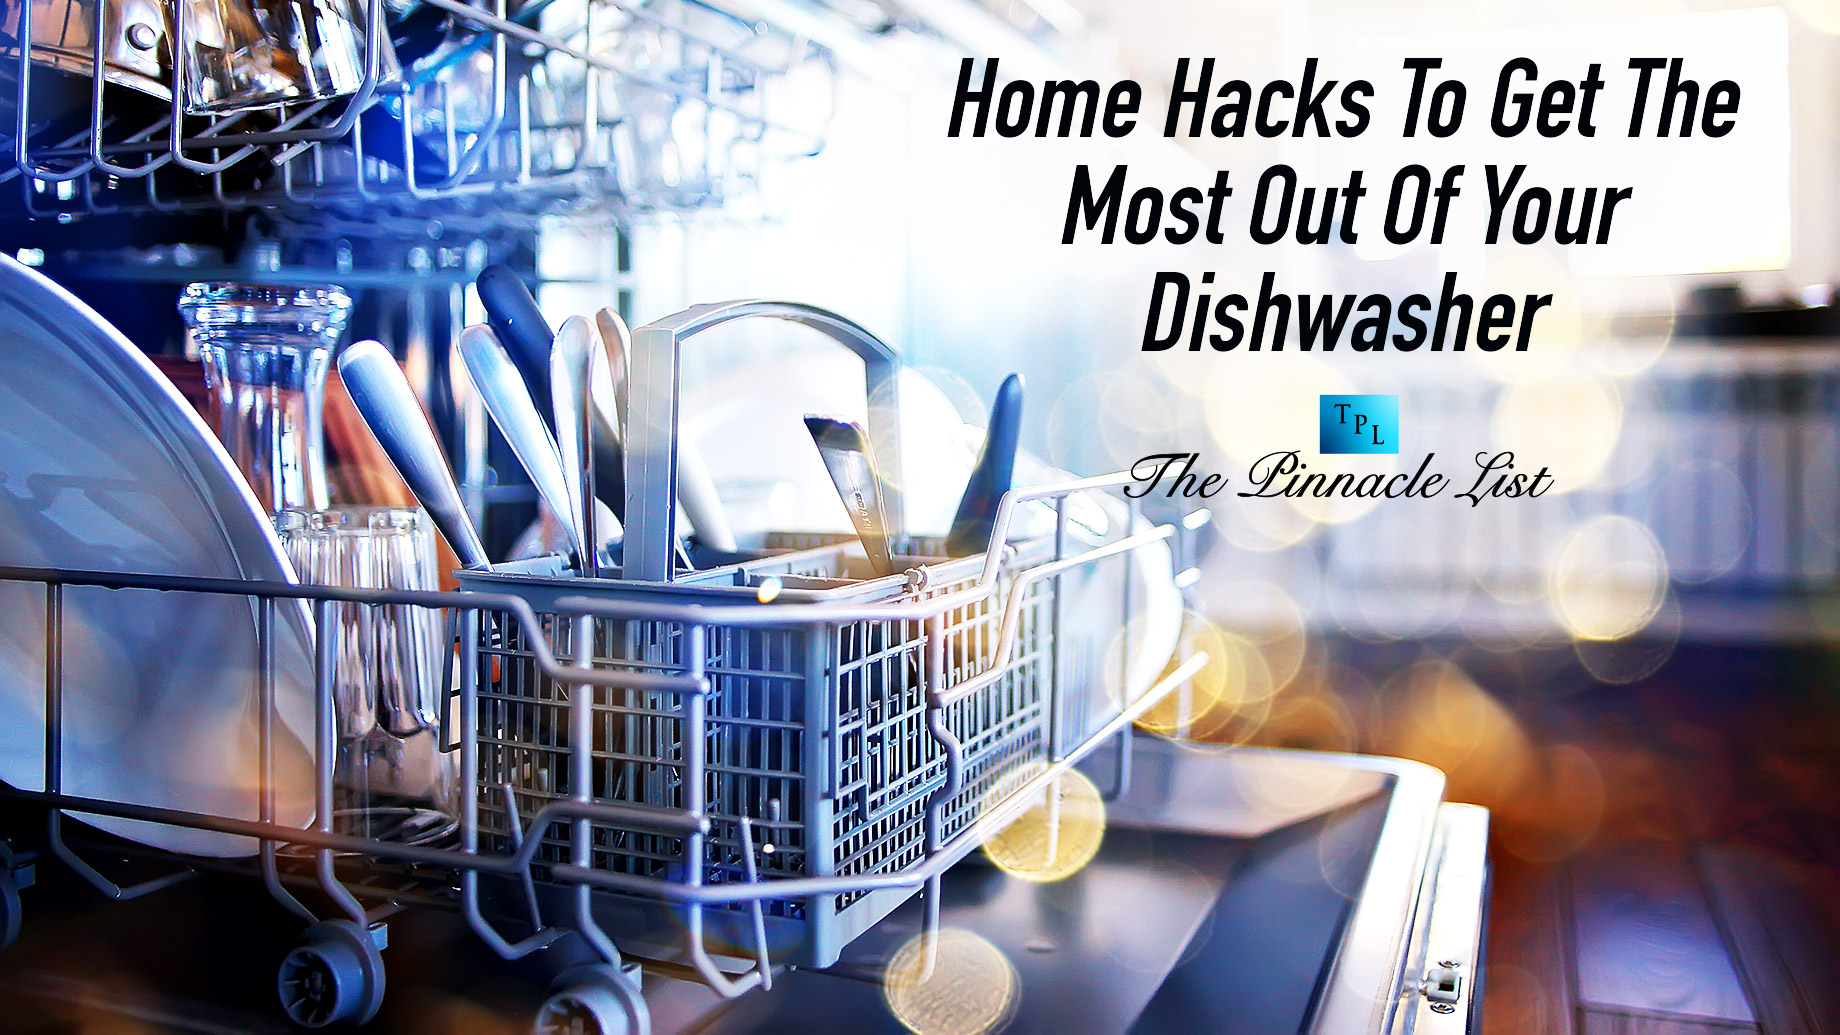 Home Hacks To Get The Most Out Of Your Dishwasher